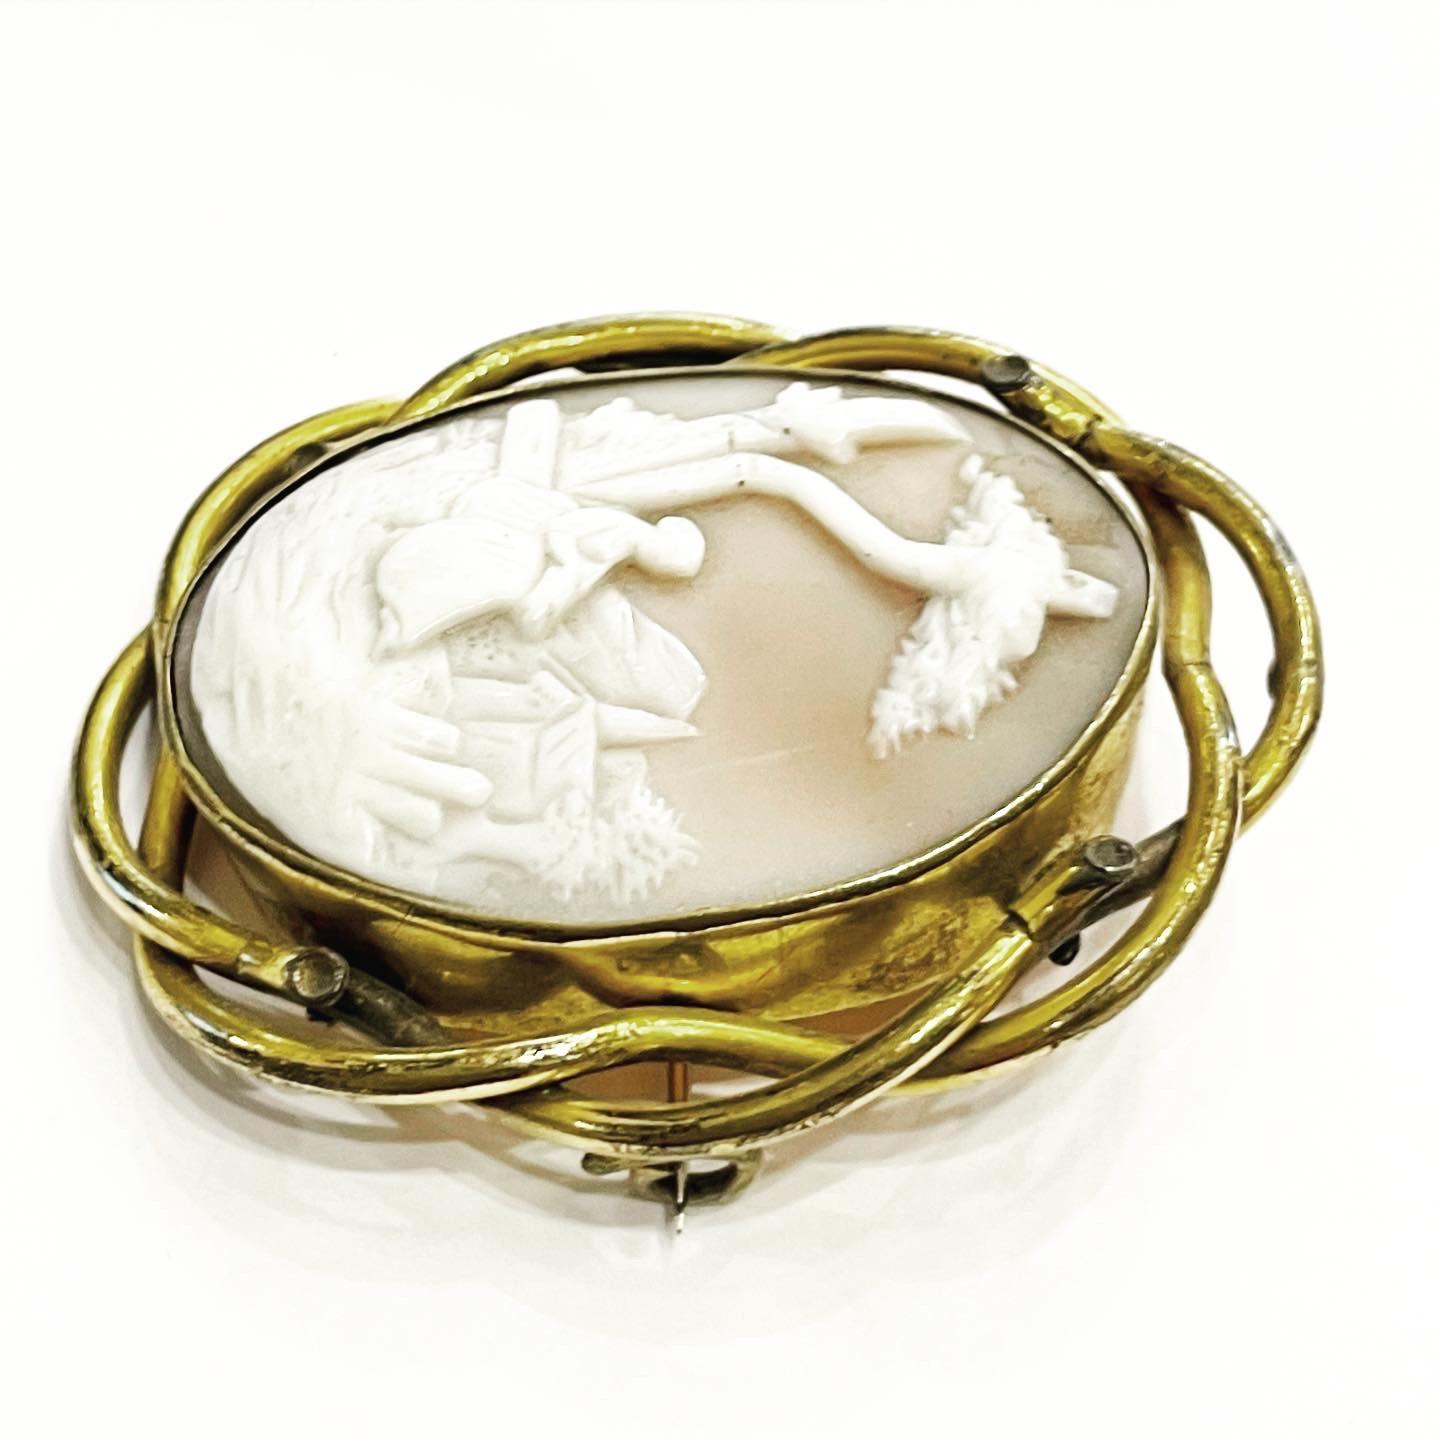  Victorian Bucolic Motif Cameo 9K Yellow Gold Shell Intaglio Brooch In Good Condition For Sale In Pamplona, Navarra